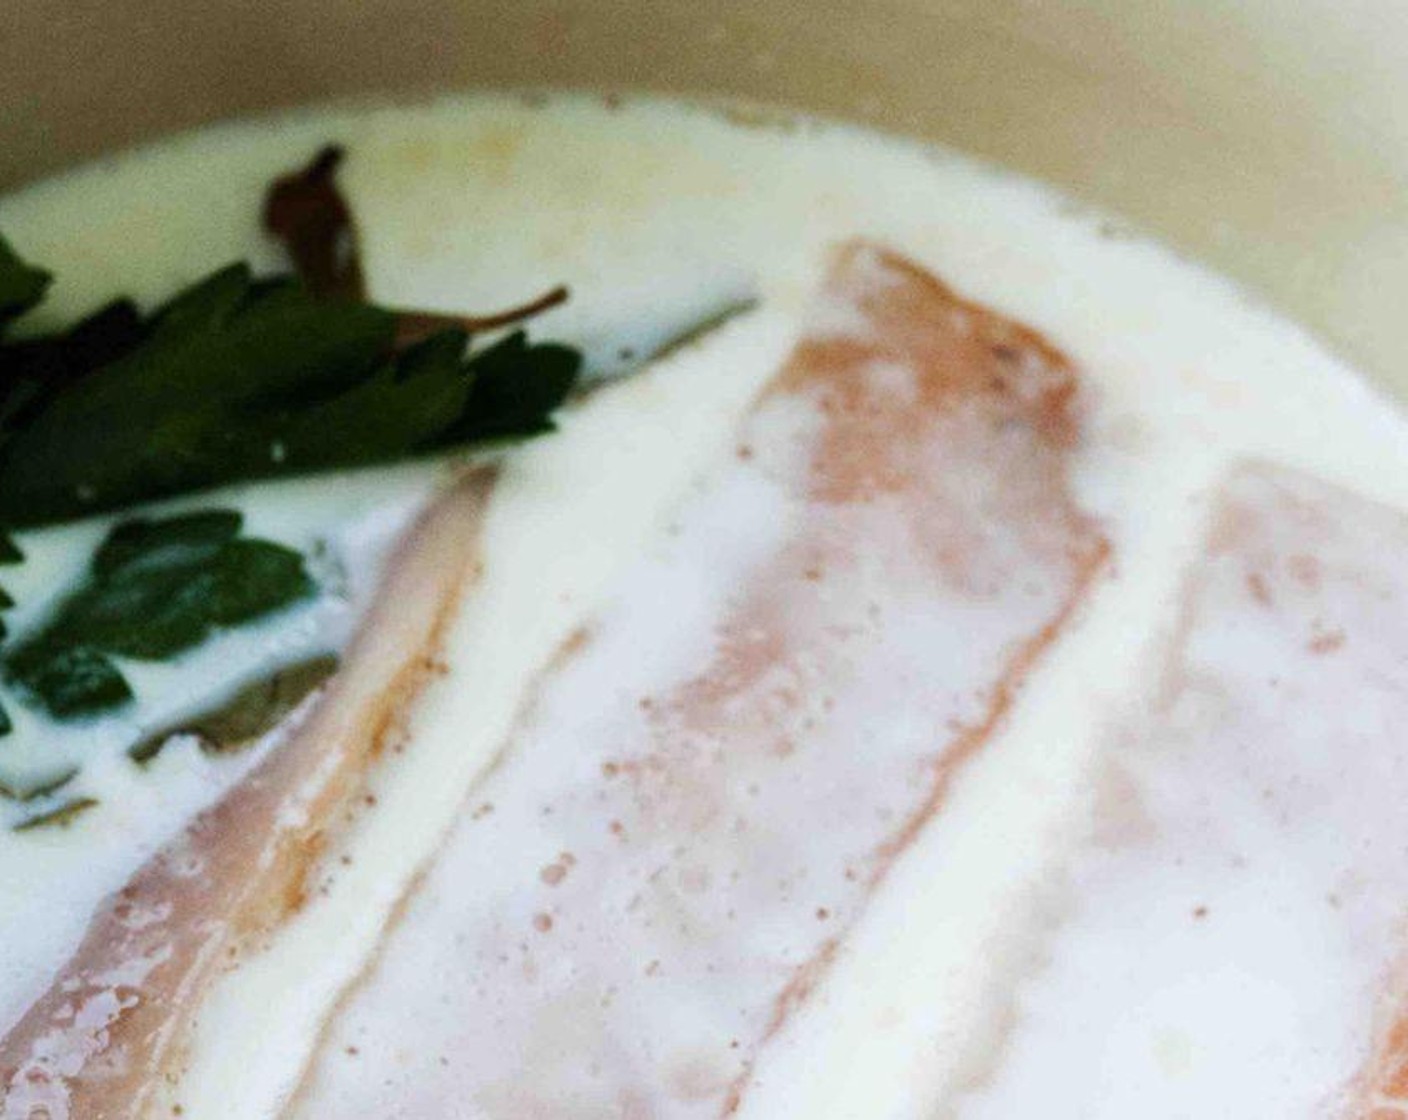 step 1 Bring Whole Milk (1 1/4 cups) and Bay Leaves (2) to a simmer, add Skinless Salmon Fillets (9 oz) and poach it for about 10 minutes or until tender.